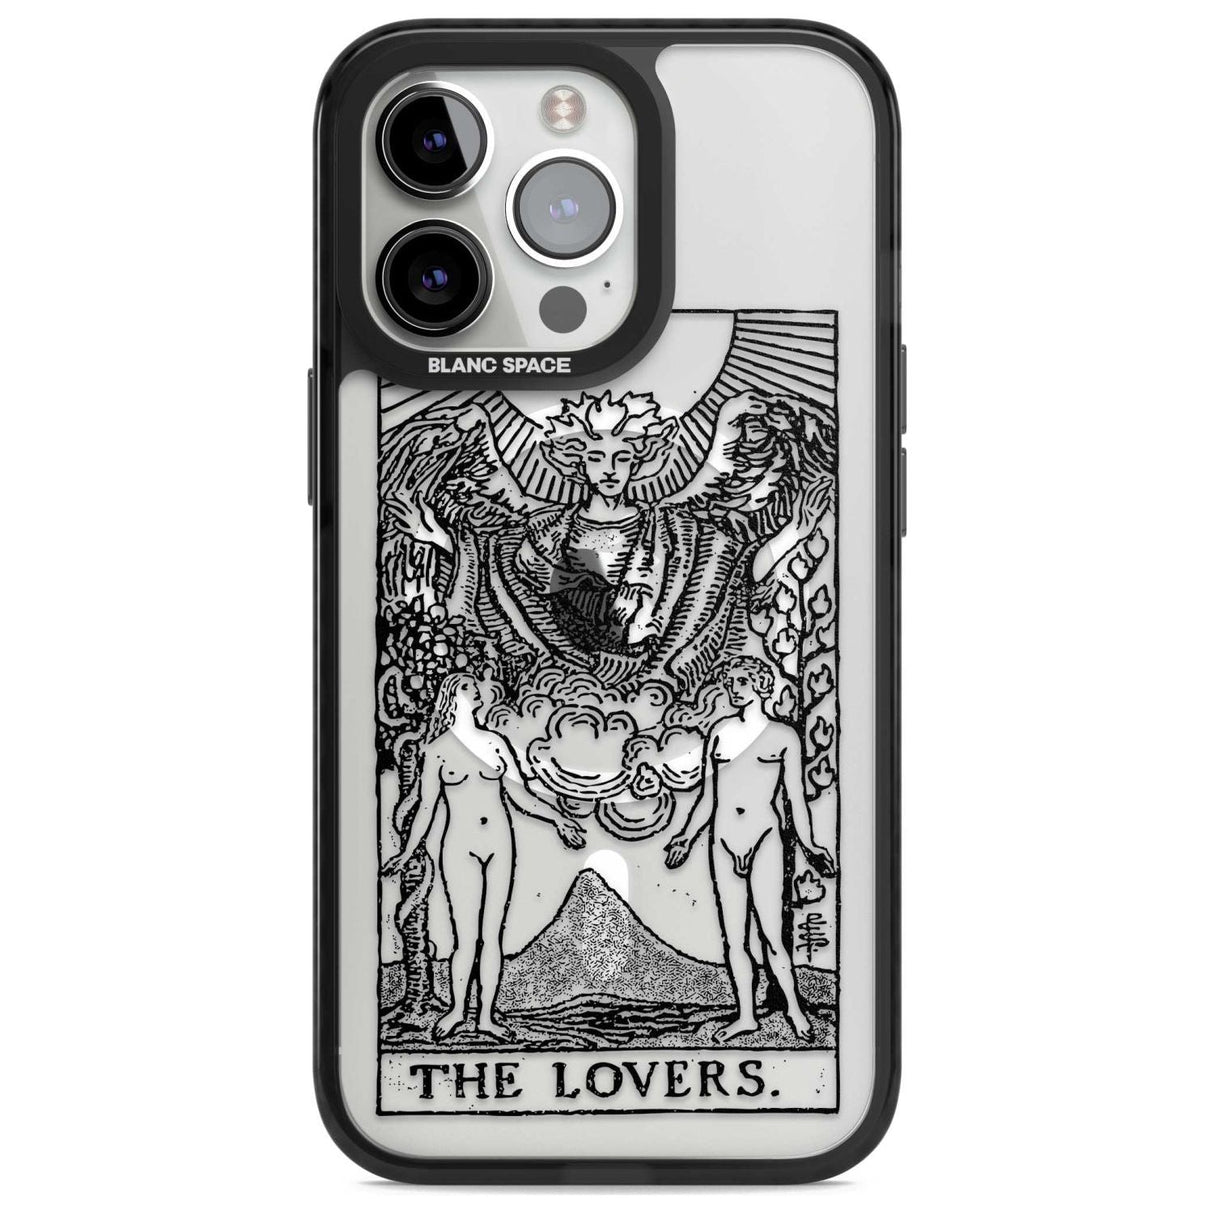 Personalised The Lovers Tarot Card - Transparent Custom Phone Case iPhone 15 Pro Max / Magsafe Black Impact Case,iPhone 15 Pro / Magsafe Black Impact Case,iPhone 14 Pro Max / Magsafe Black Impact Case,iPhone 14 Pro / Magsafe Black Impact Case,iPhone 13 Pro / Magsafe Black Impact Case Blanc Space